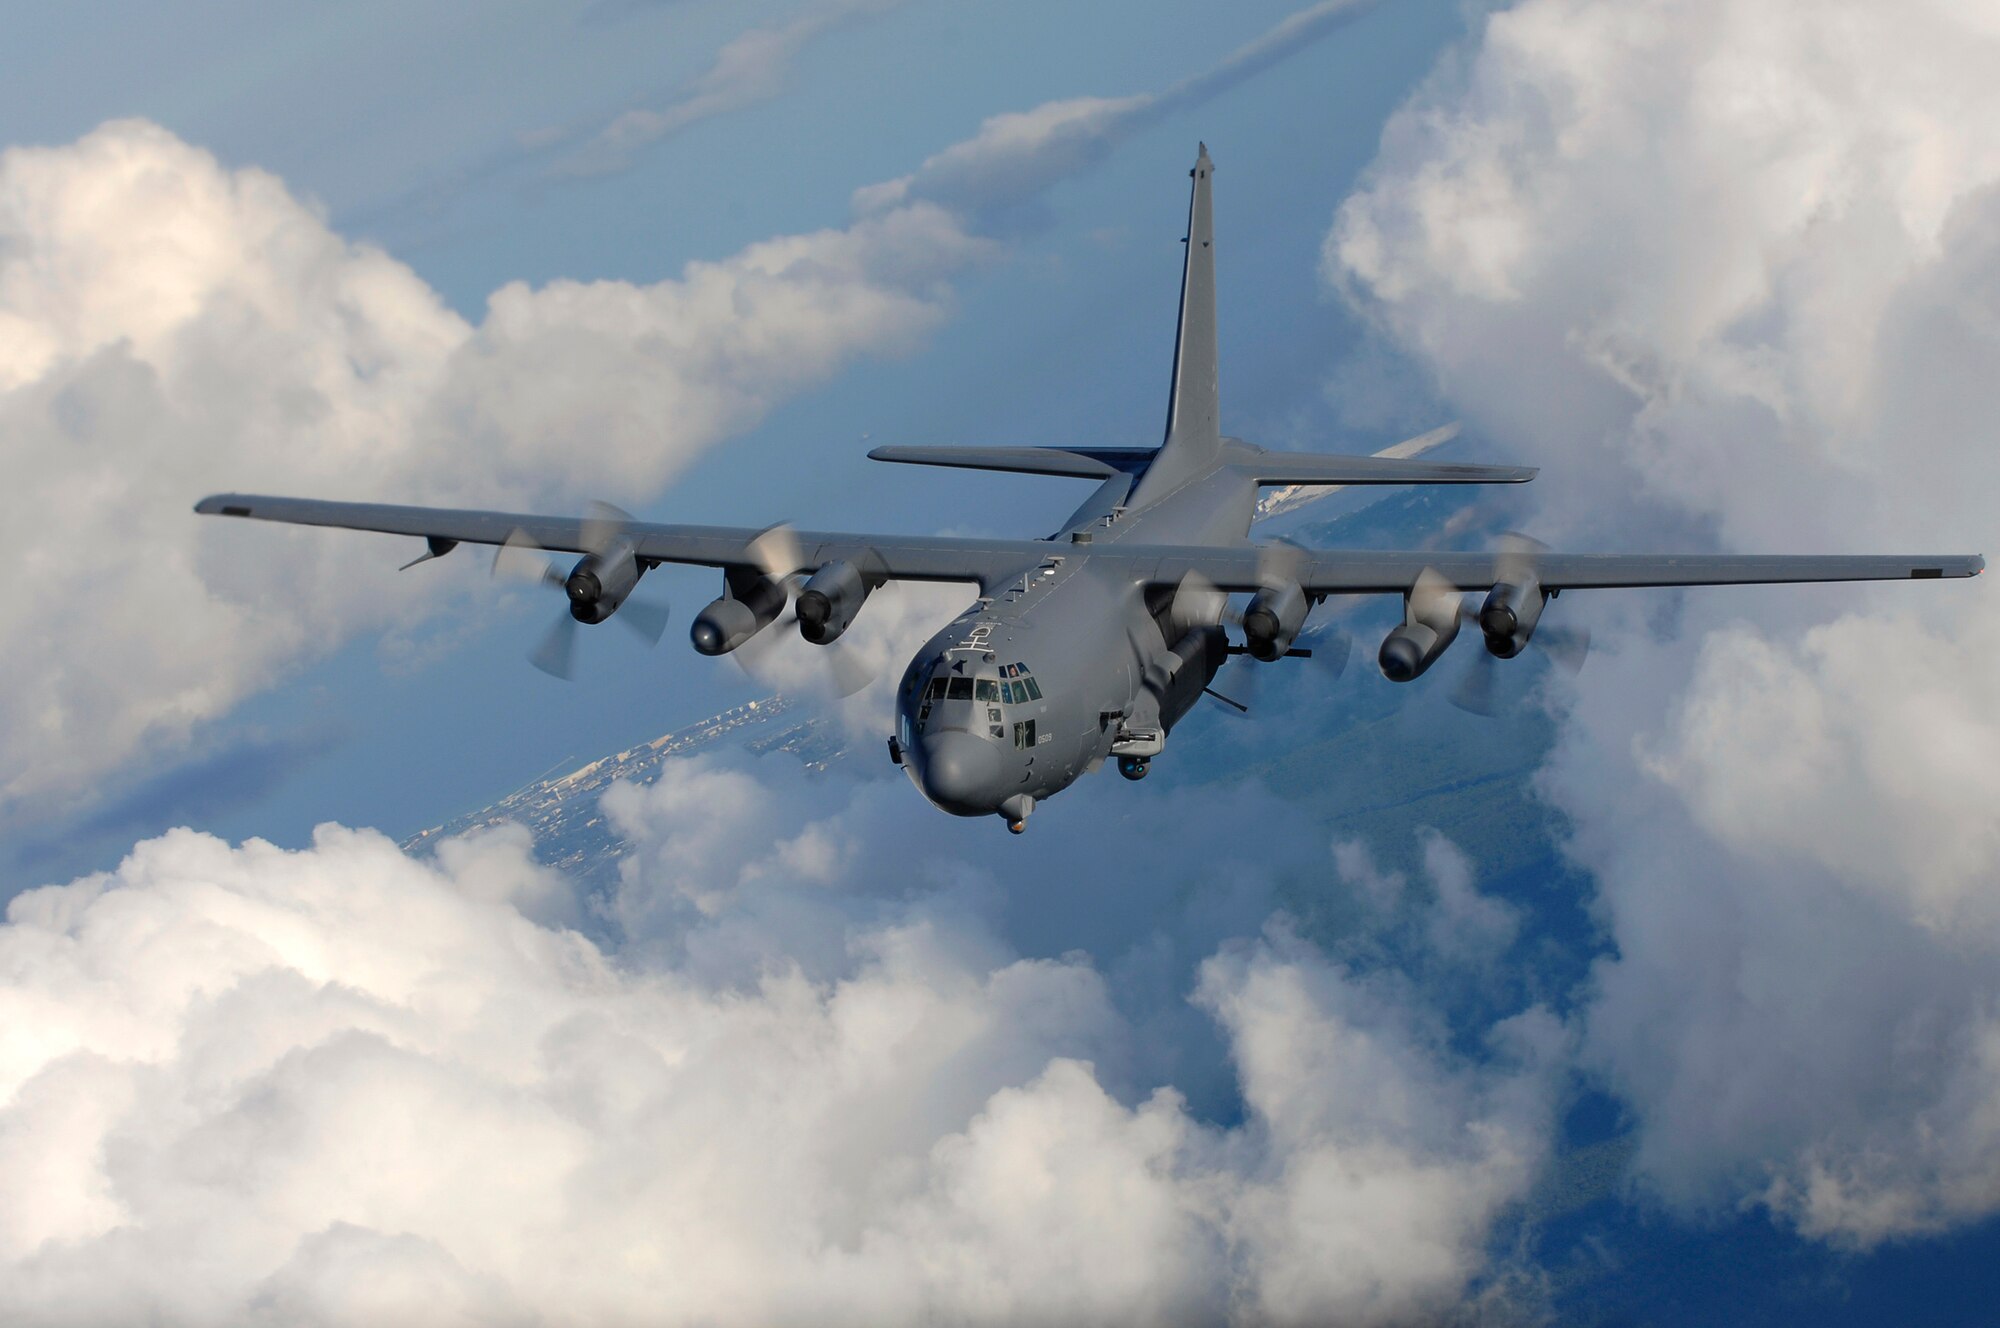 The AC-130U “Spooky” gunship's primary missions are close air support, air interdiction and force protection. The AC-130 has a rich history that includes support of military operations in Vietnam, Panama and Iraq as well as performing in many combat missions since it was fielded in the late 1960’s. (U.S. Air Force photo by Senior Airman Julianne Showalter)